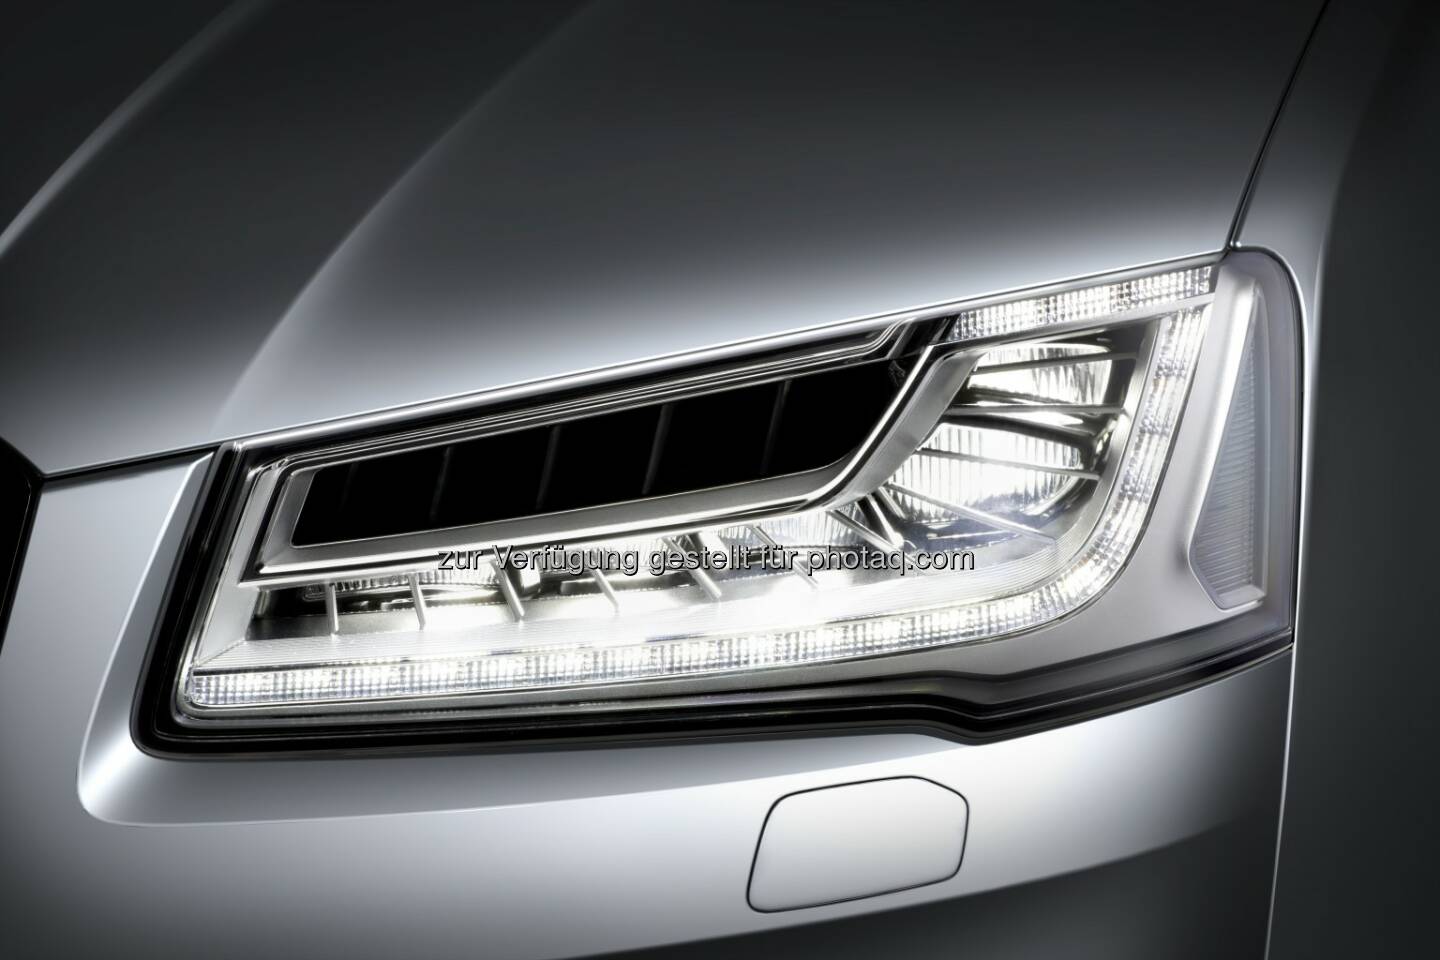 Hella - Matrix LED headlamps with glare-free high beam in an Audi A8 (Photo: HELLA)